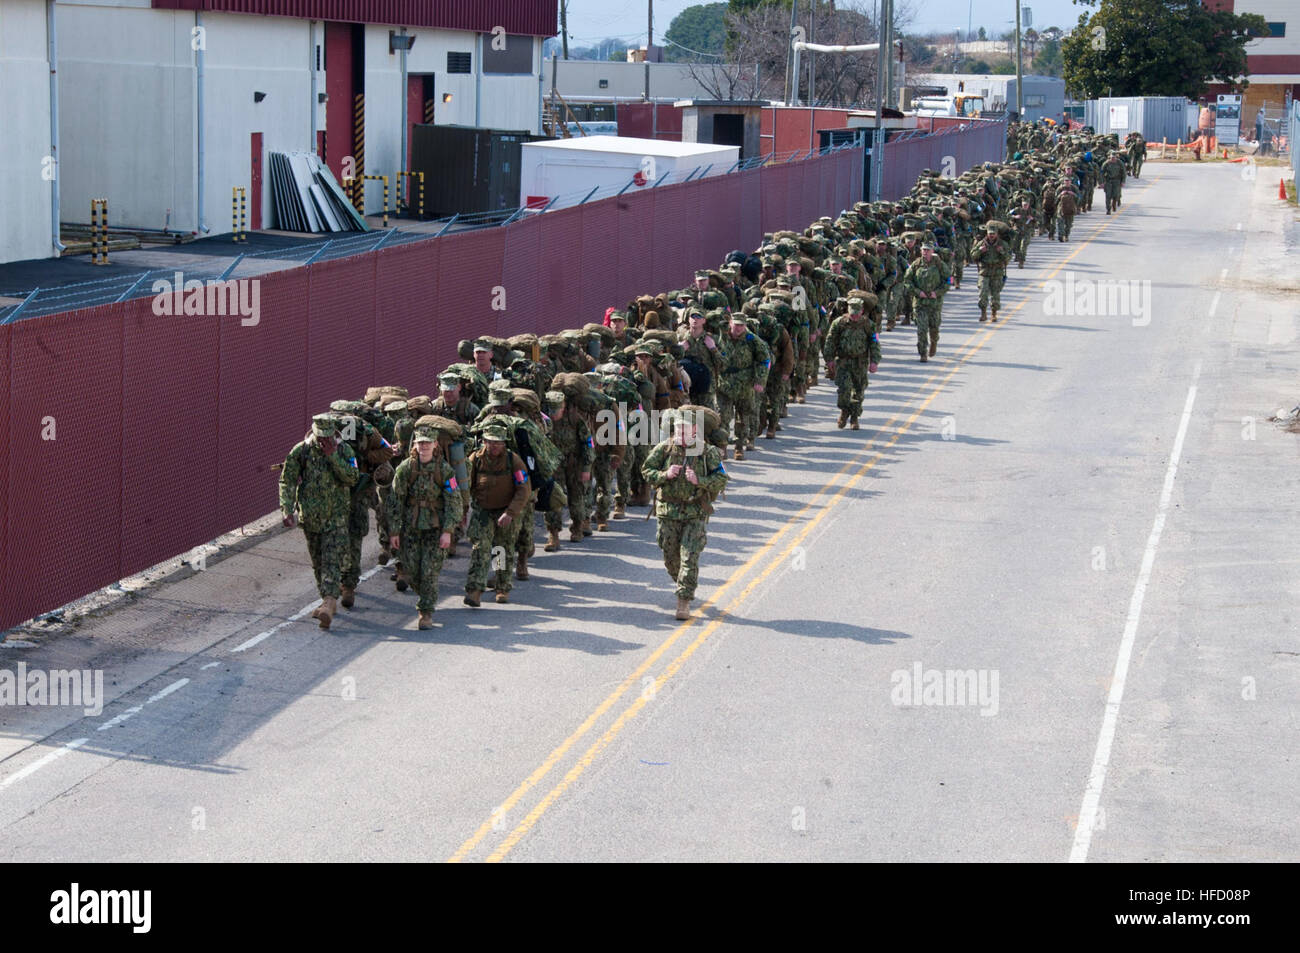 Sailors assigned to Amphibious Construction Battalion 2 march in column formation during a five-mile march at Joint Expeditionary Base Little Creek-Fort Story. (U.S. Navy photo by Mass Communication Specialist 2nd Class  Jonathan Pankau/Released) Sailors conduct 5-mile march 130305-N-CV877-036 Stock Photo